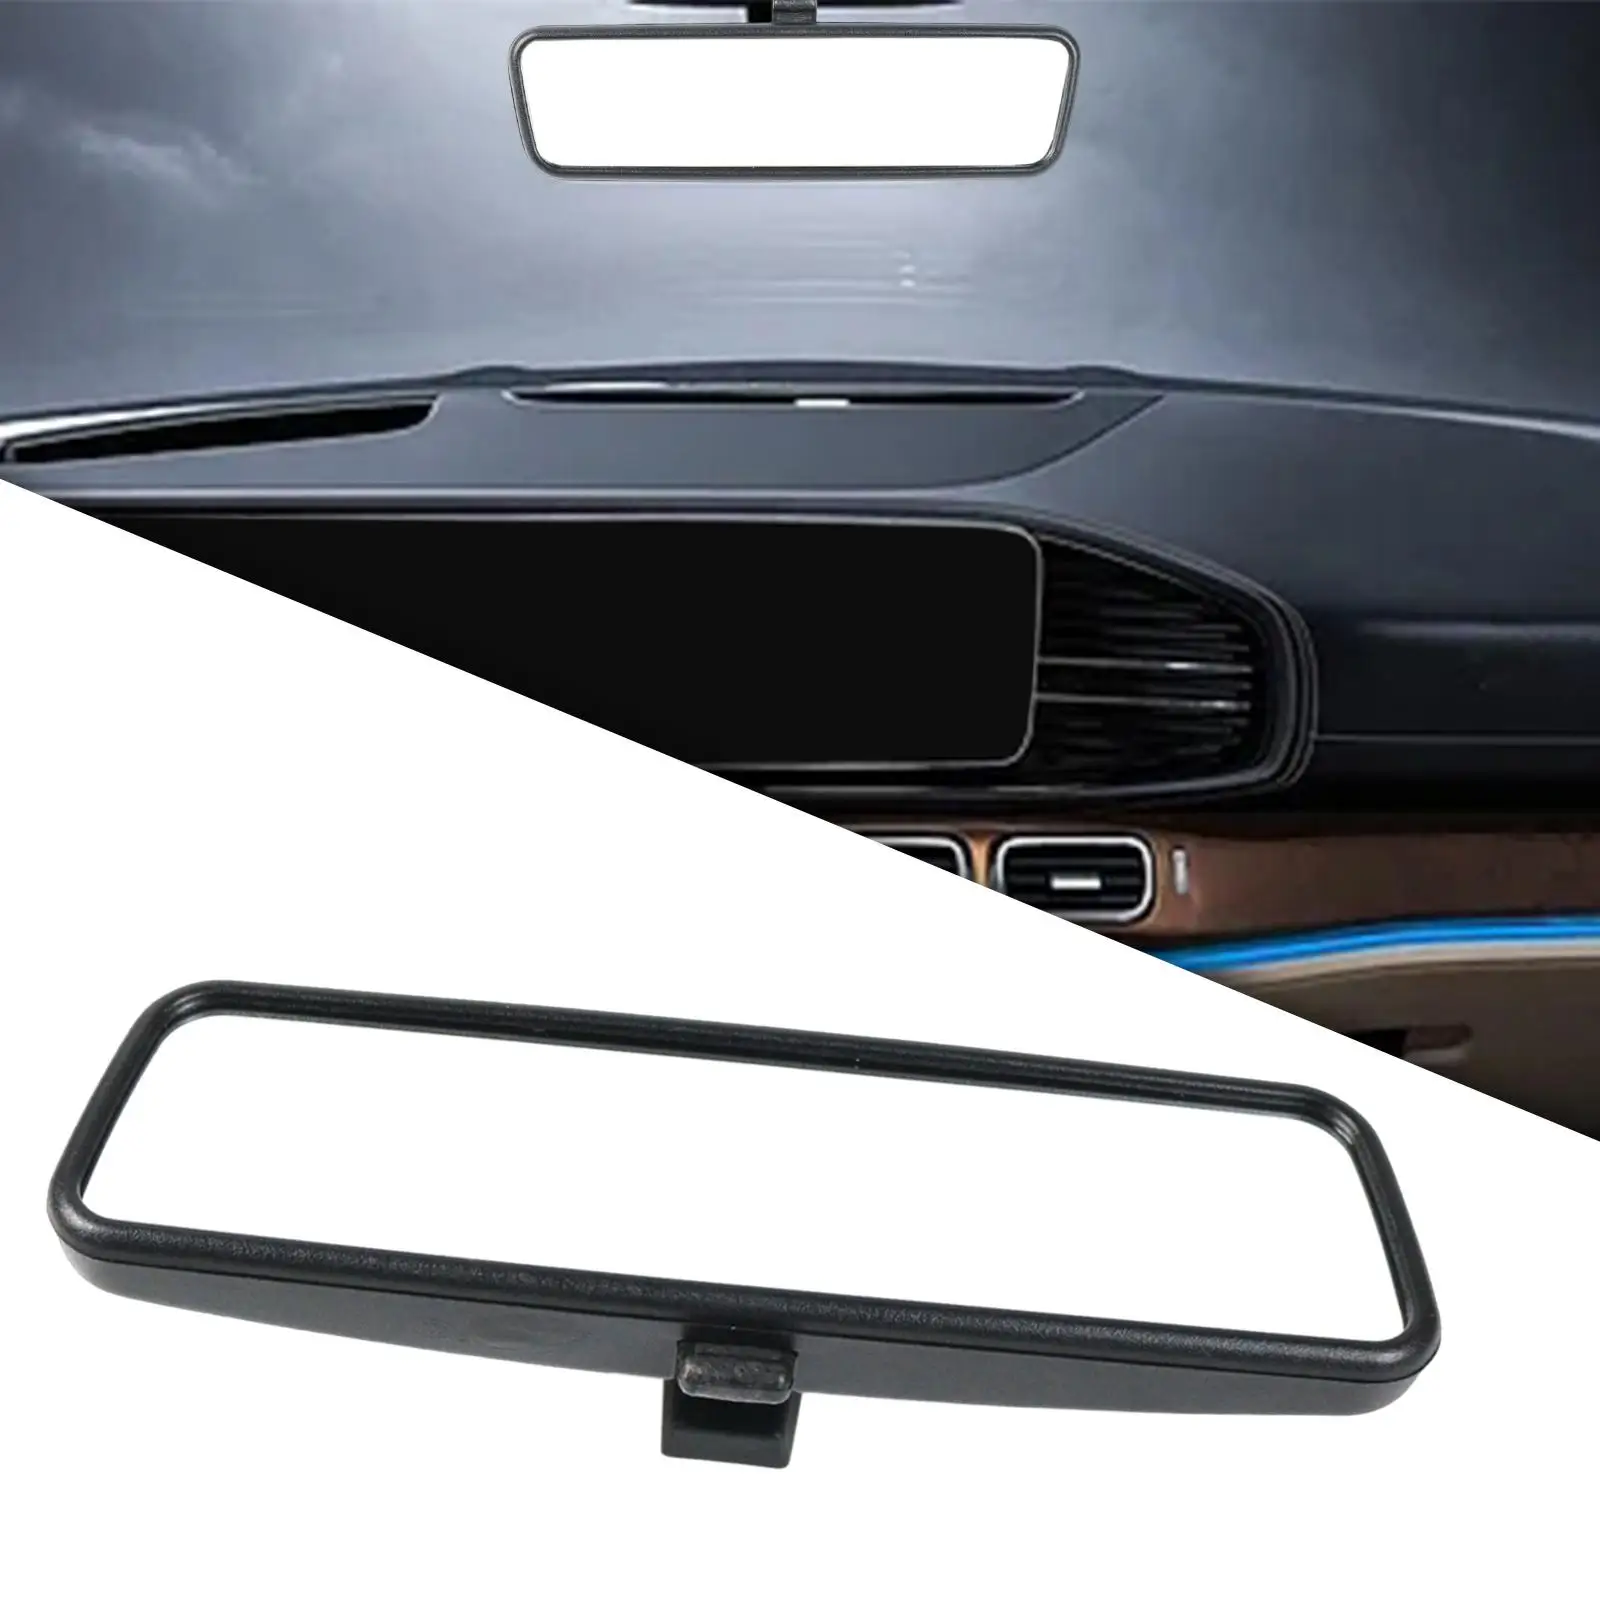 Interior Rear View Mirror 814842 for Renault Easy to Install Accessory